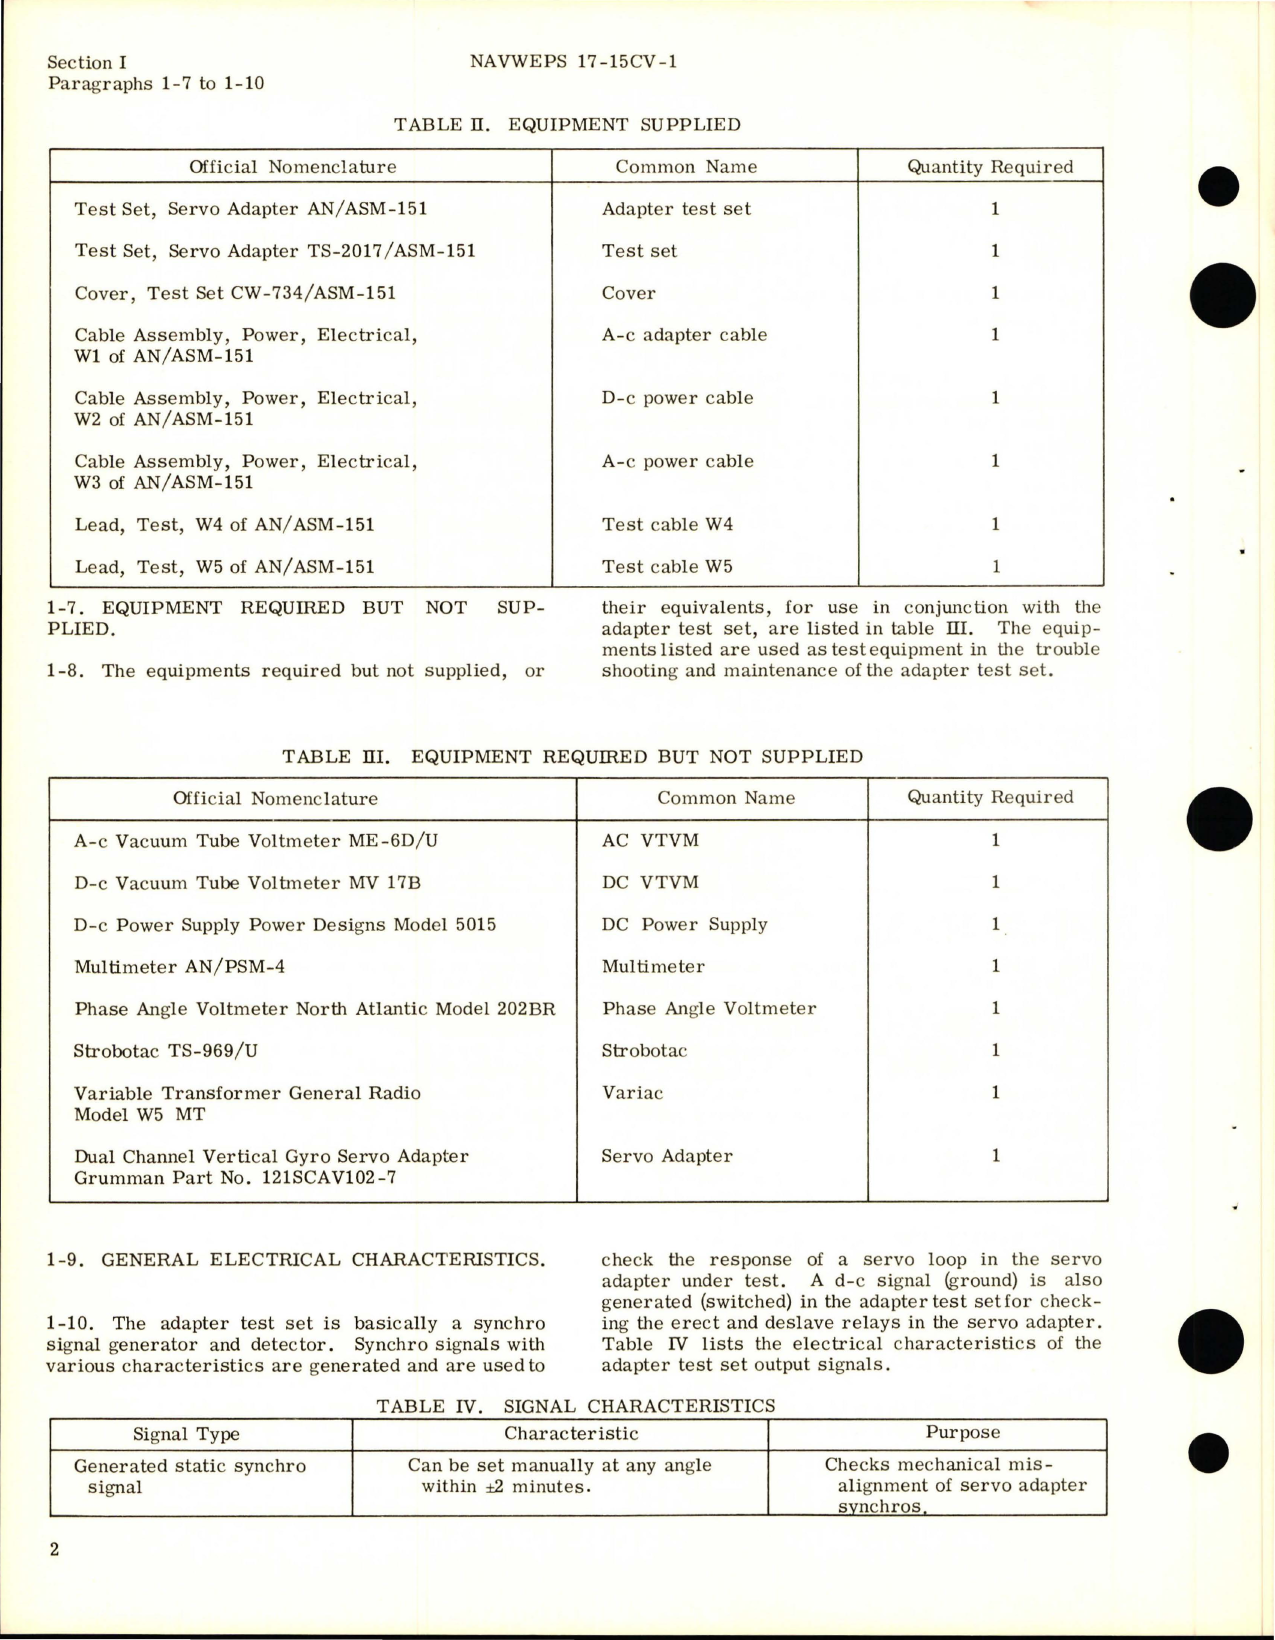 Sample page 8 from AirCorps Library document: Operation and Service Instructions with Illustrated Parts for Servo Adapter Test Set - ASM-151 - Part GAEC 121SEAV114